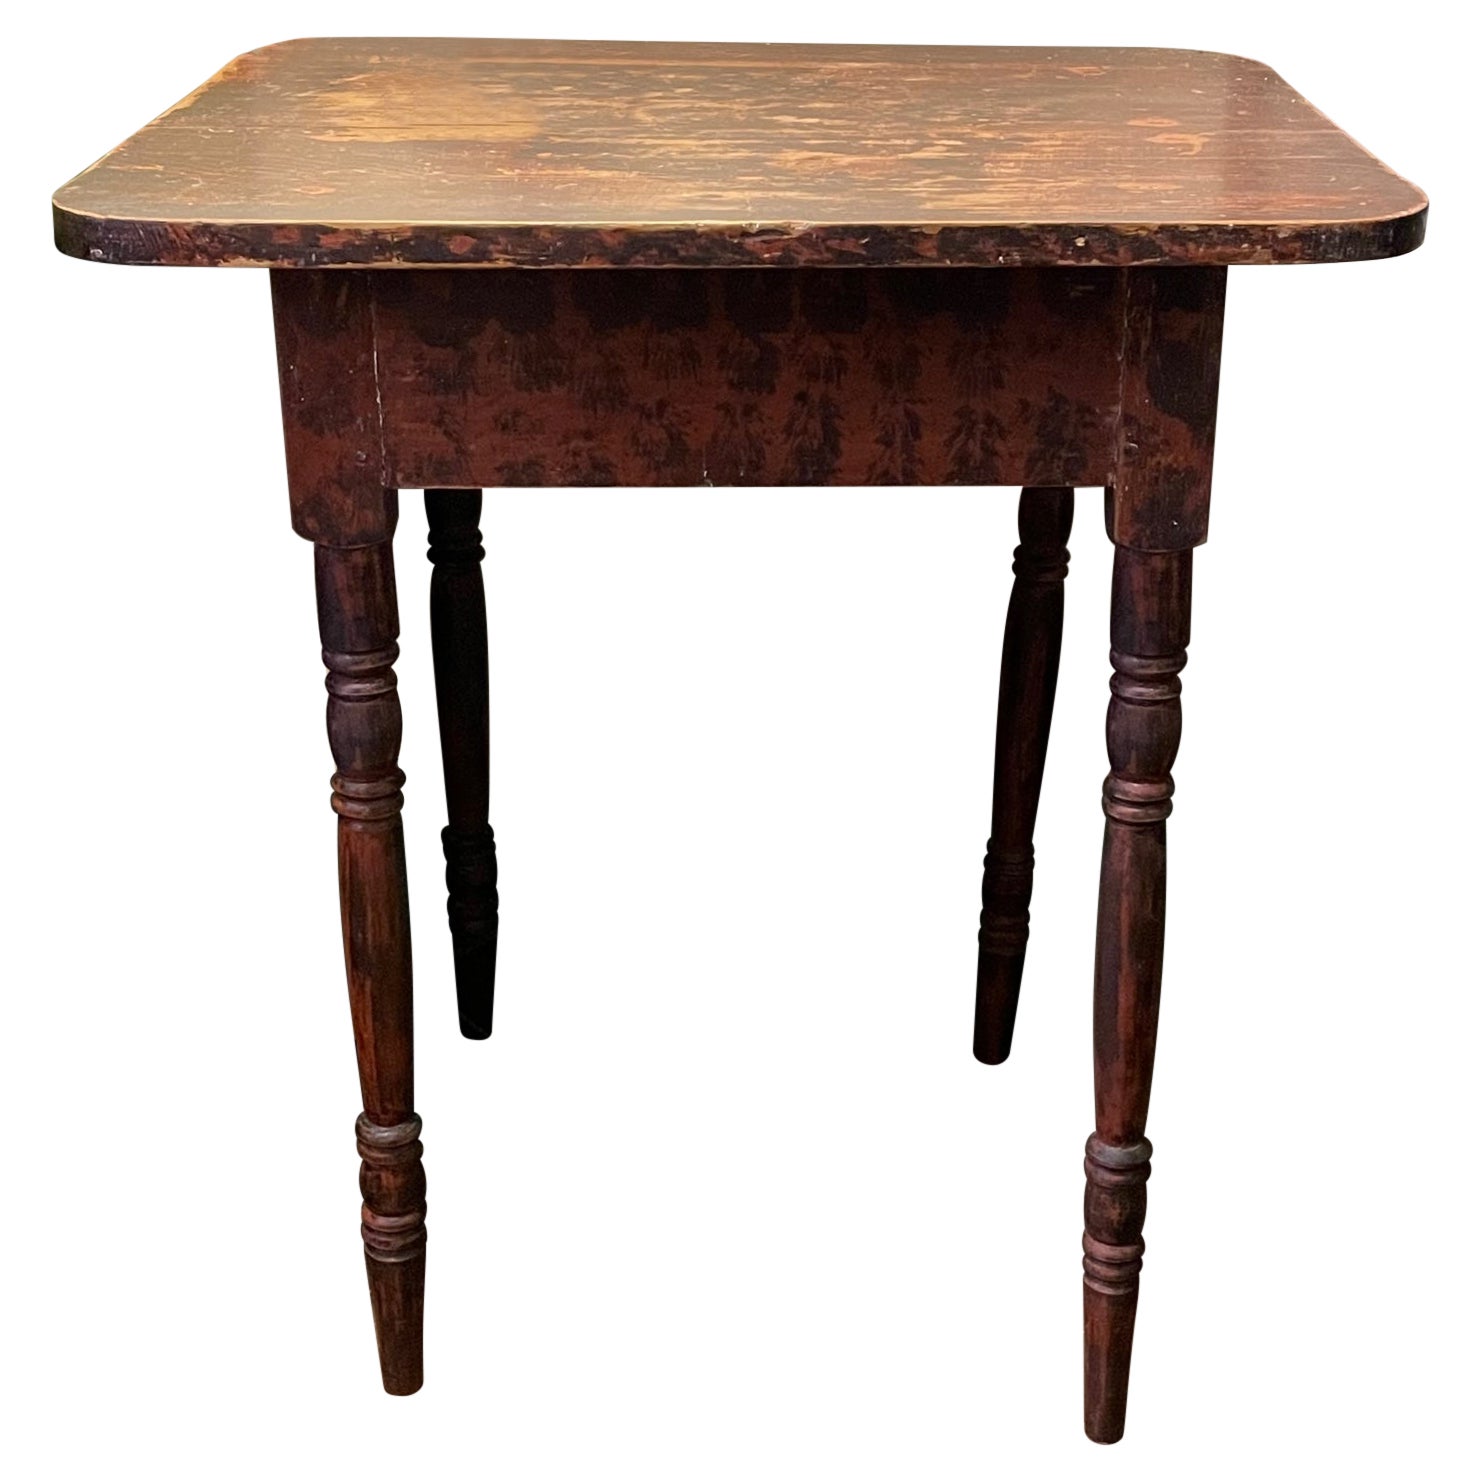 Mid 19th. Century Side Table with Turned Legs in Original Red Paint